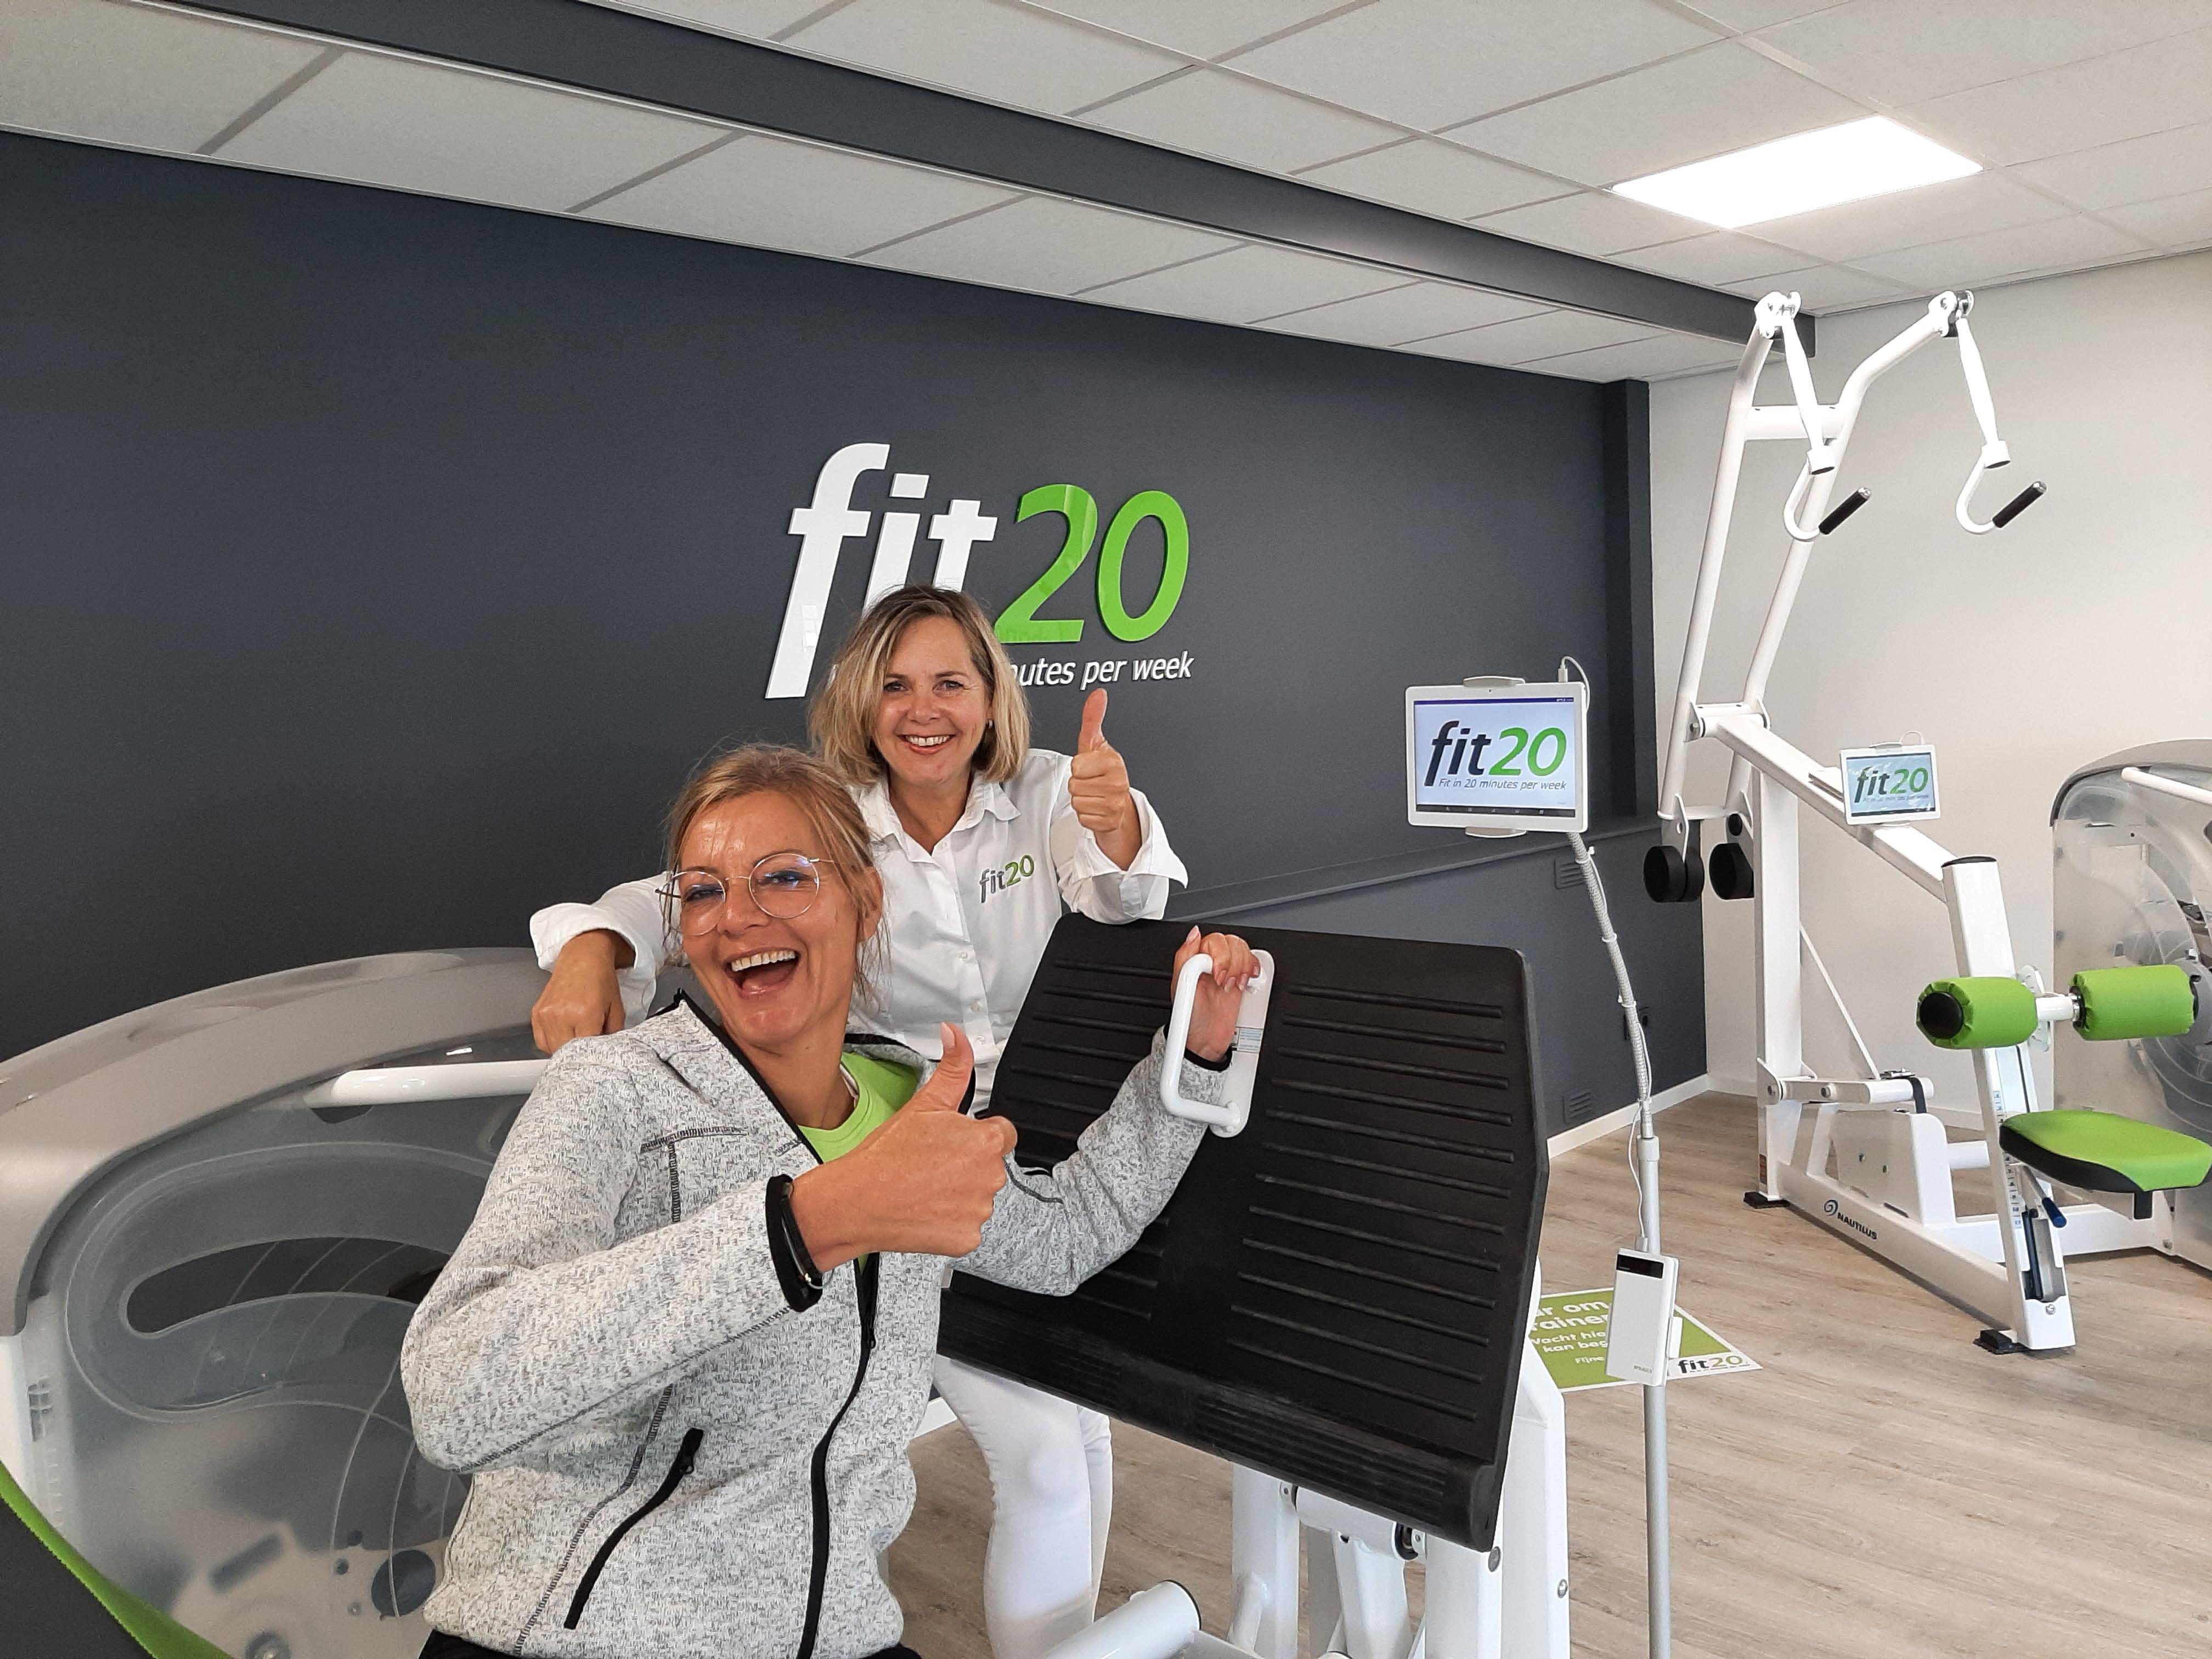 Fit20 franchises are now available across the UK.